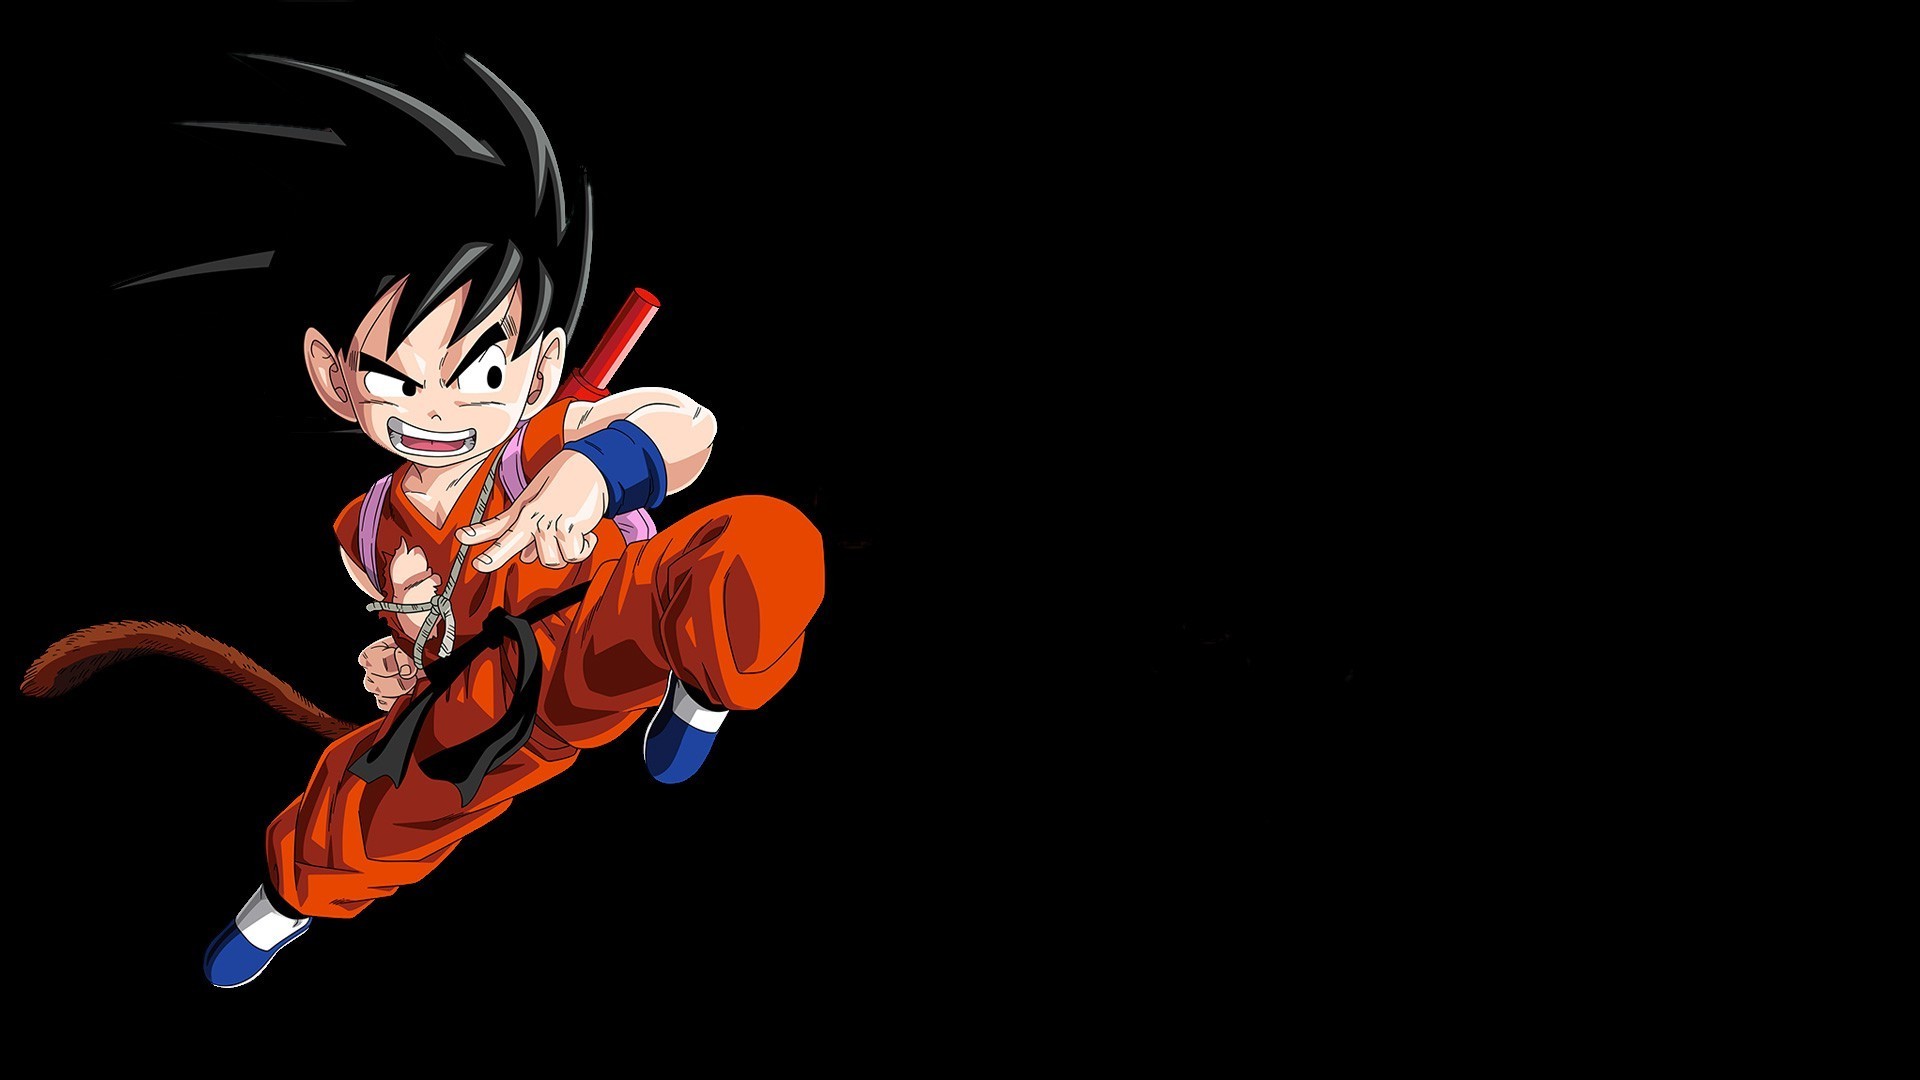 Kid Goku HD Backgrounds With Resolution 1920X1080 pixel. You can make this wallpaper for your Desktop Computer Backgrounds, Mac Wallpapers, Android Lock screen or iPhone Screensavers